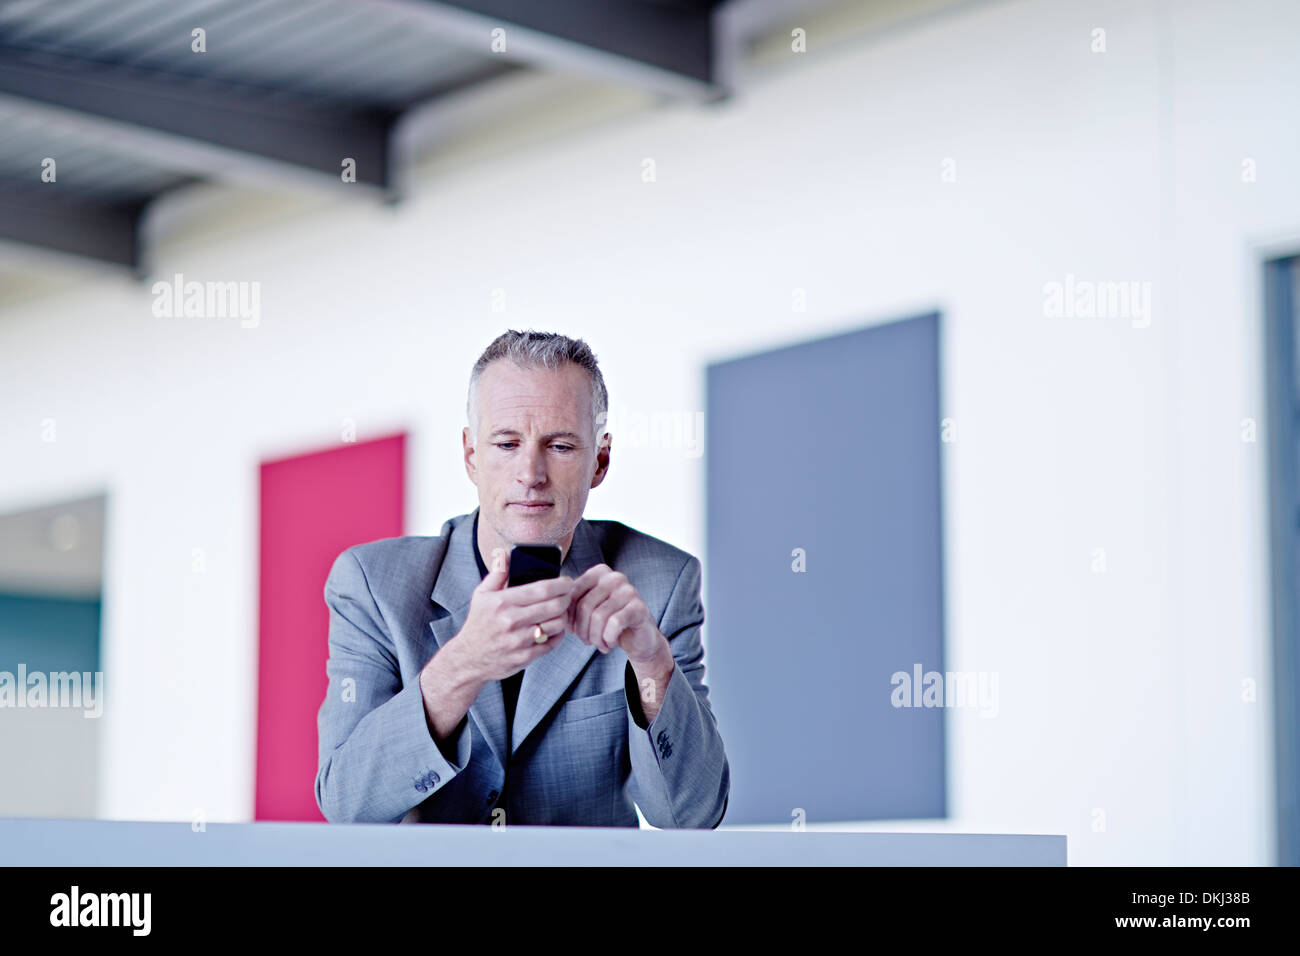 Businessman using cell phone in lobby Banque D'Images